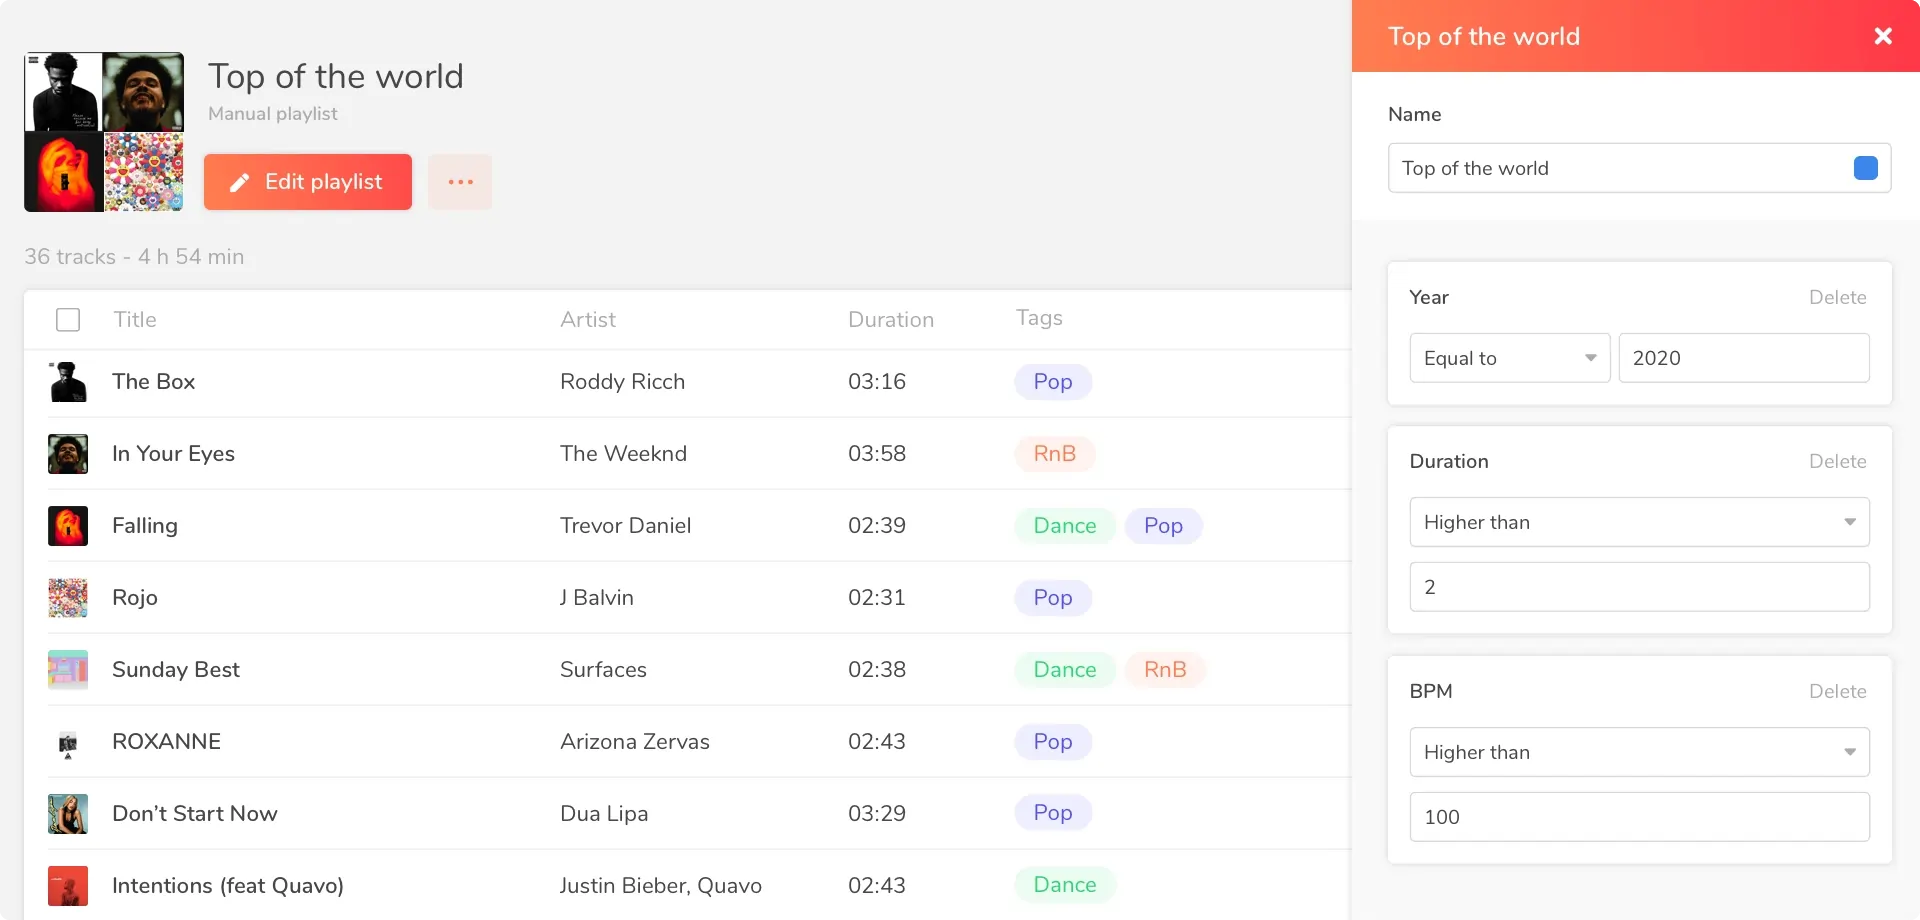 Organize your radio schedule using filters and tags